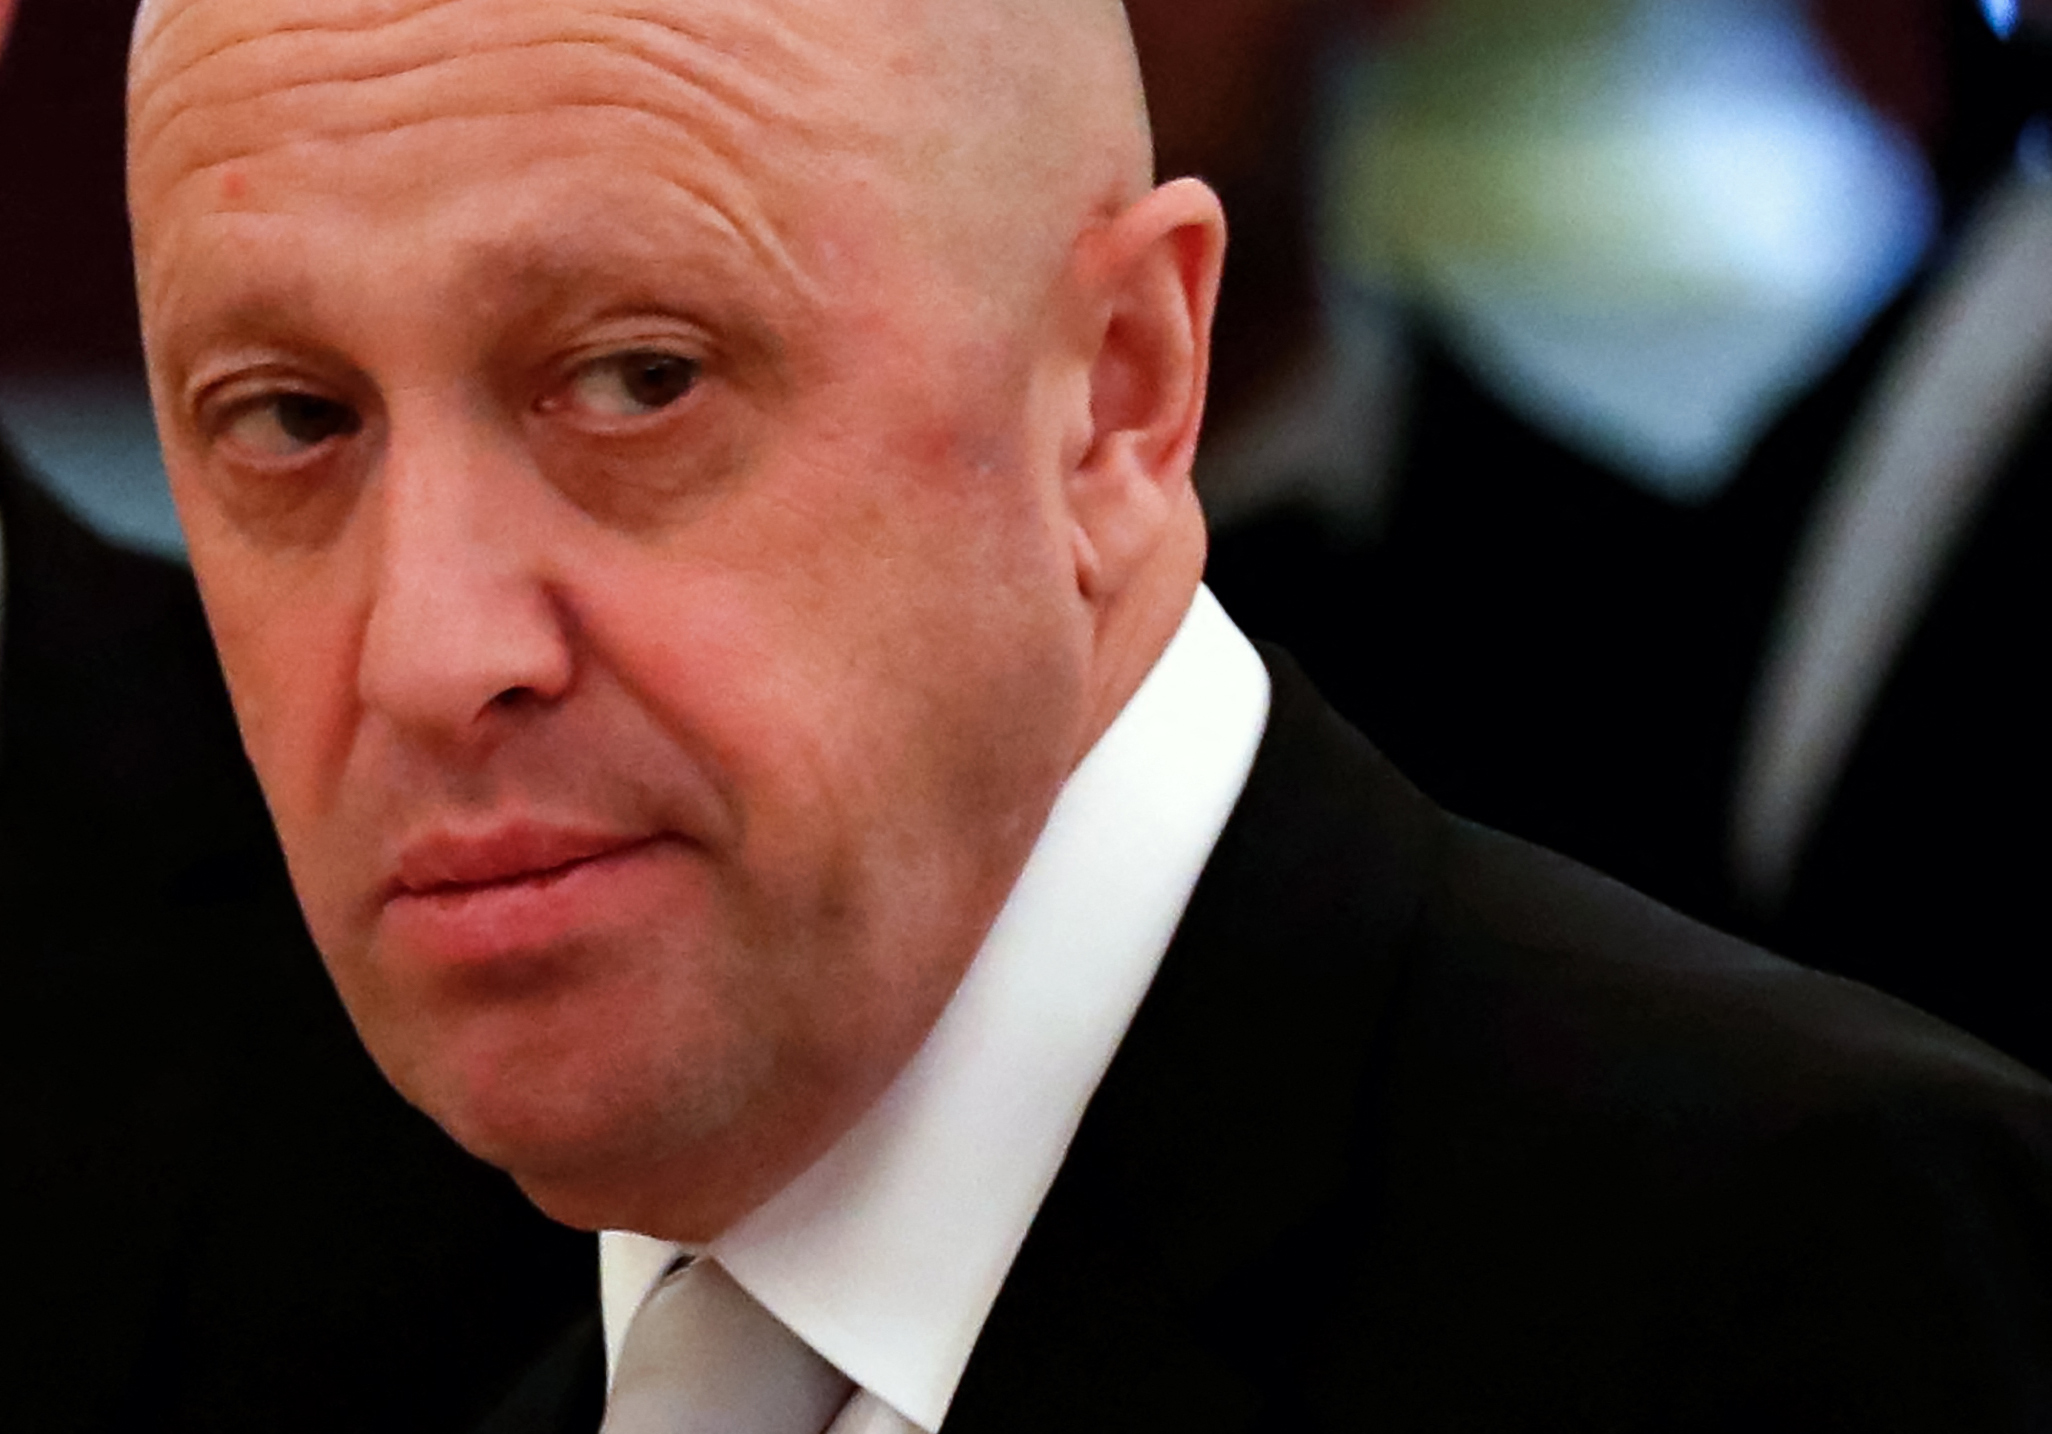 Prigozhin Photo May Offer Clue to His Whereabouts